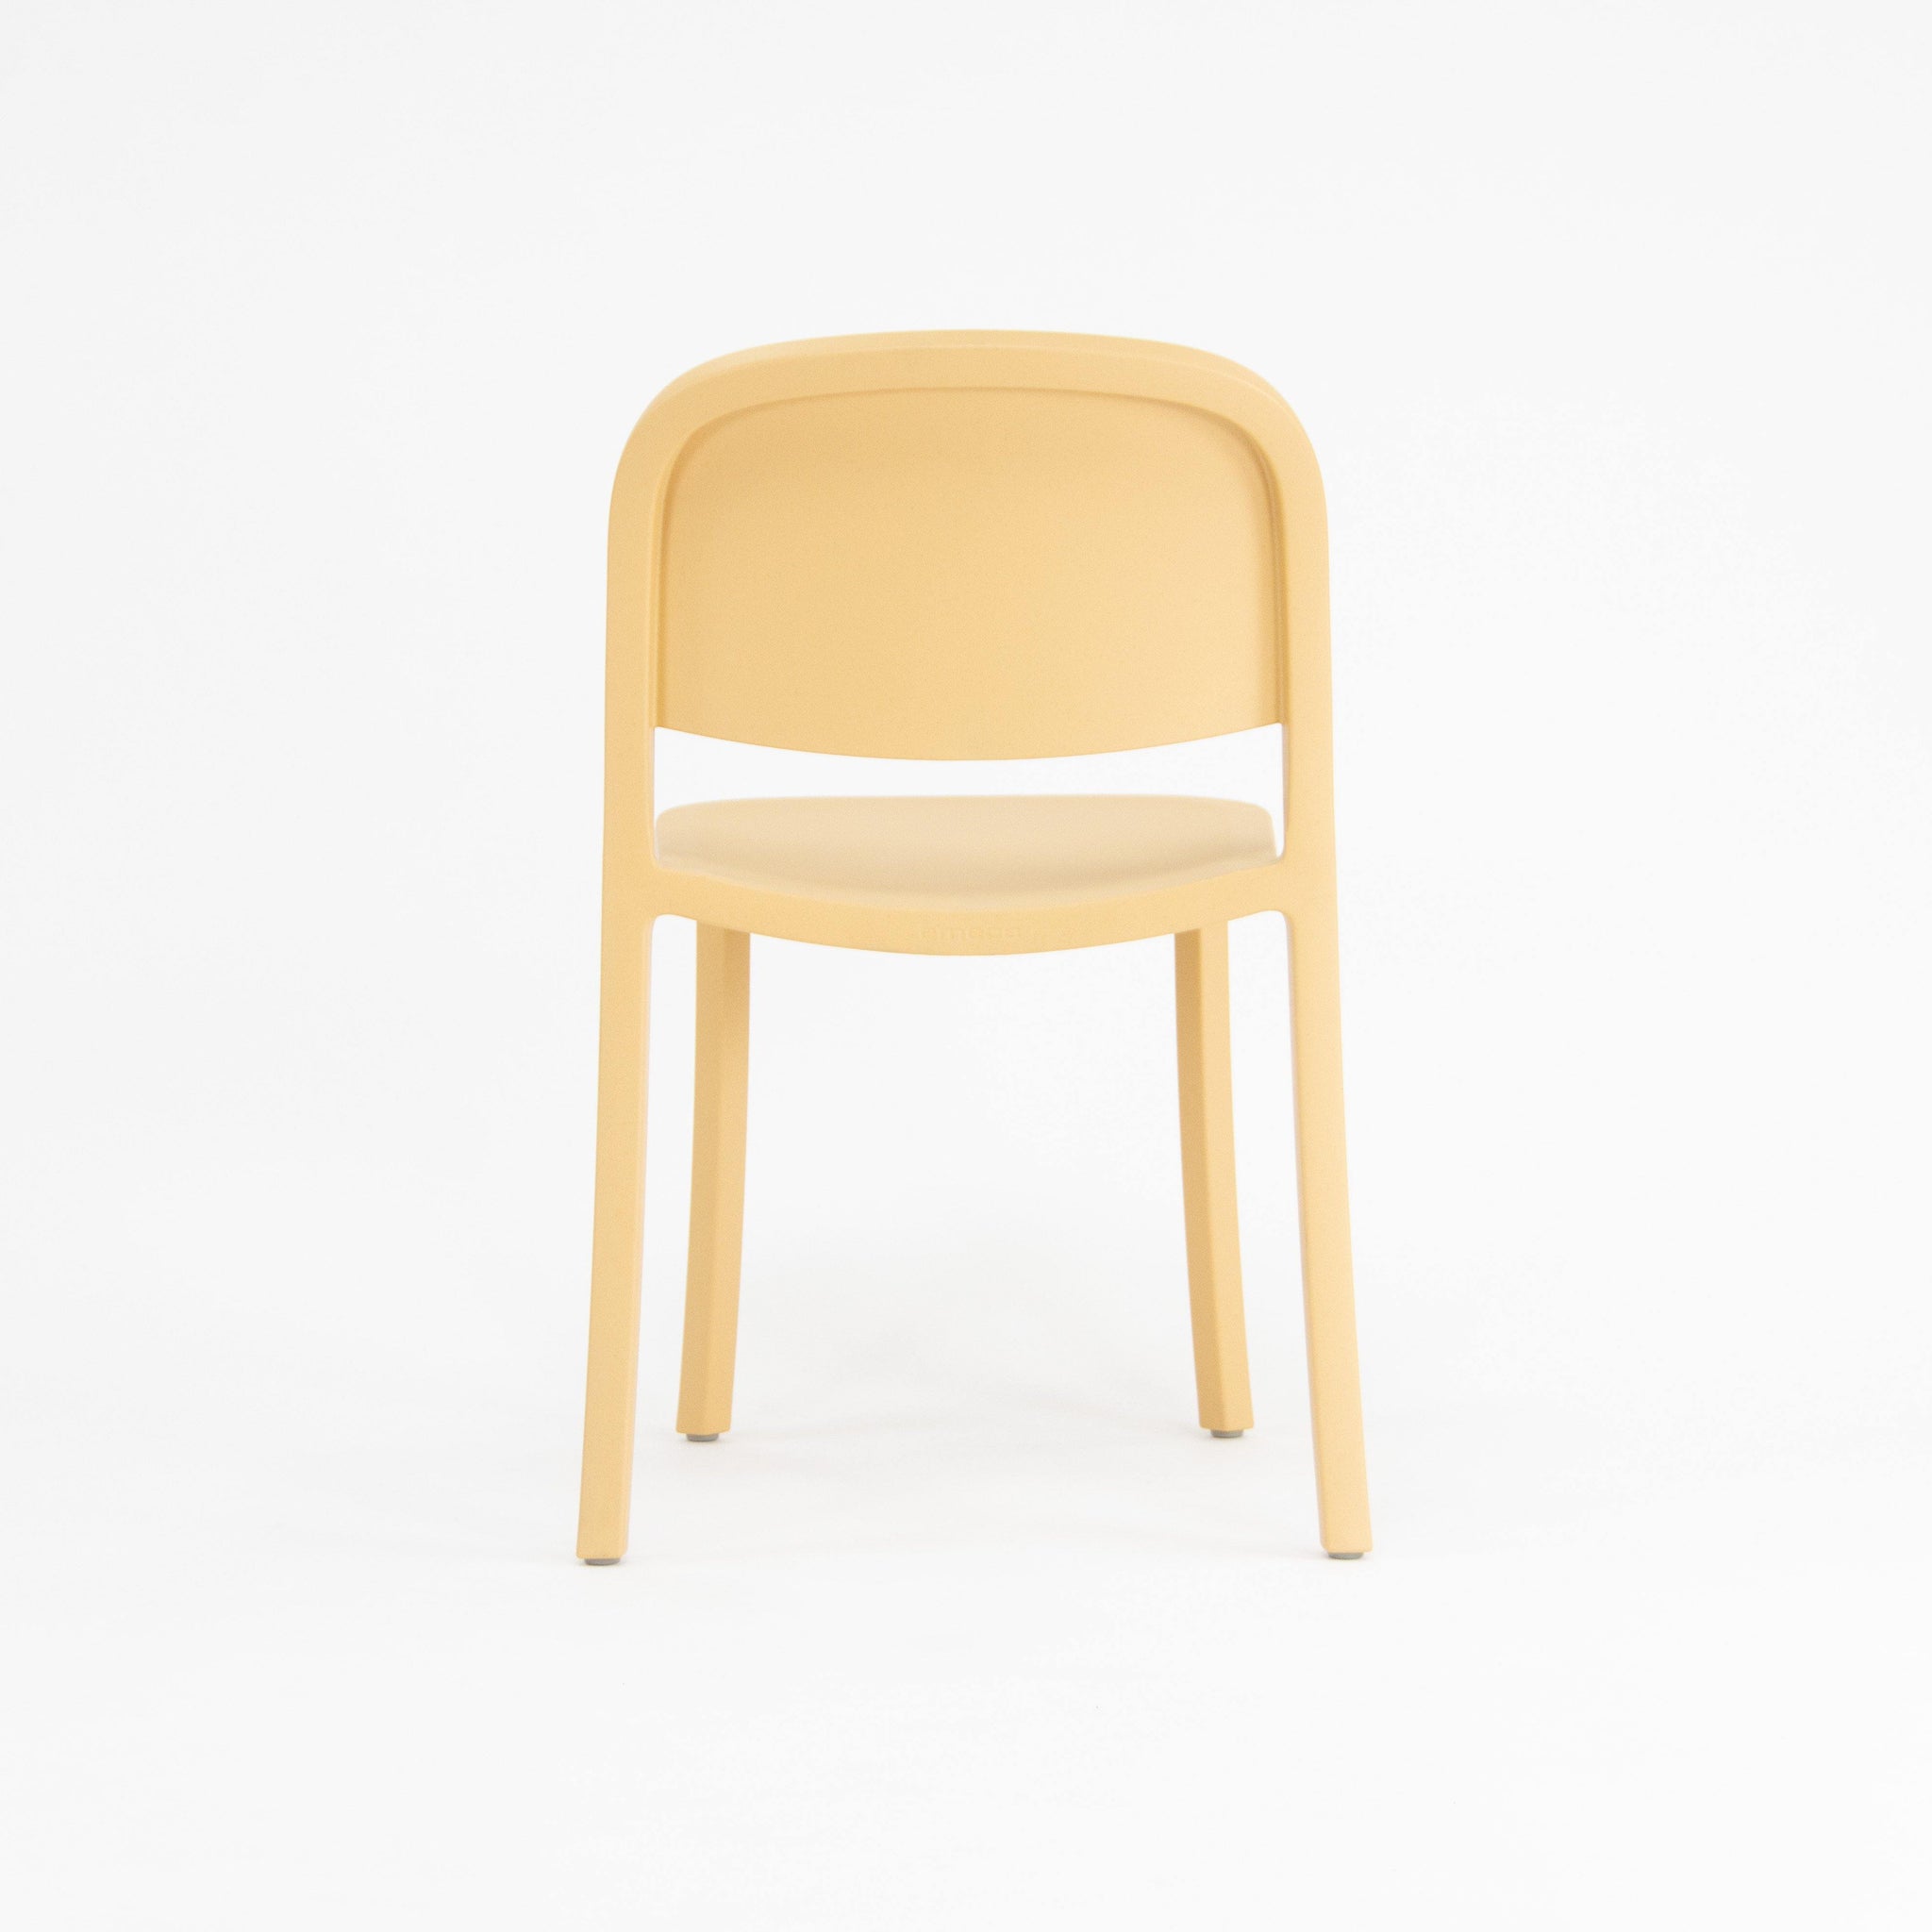 1 Inch Reclaimed Stacking Chair by Jasper Morrison for Emeco - Rarify Inc.